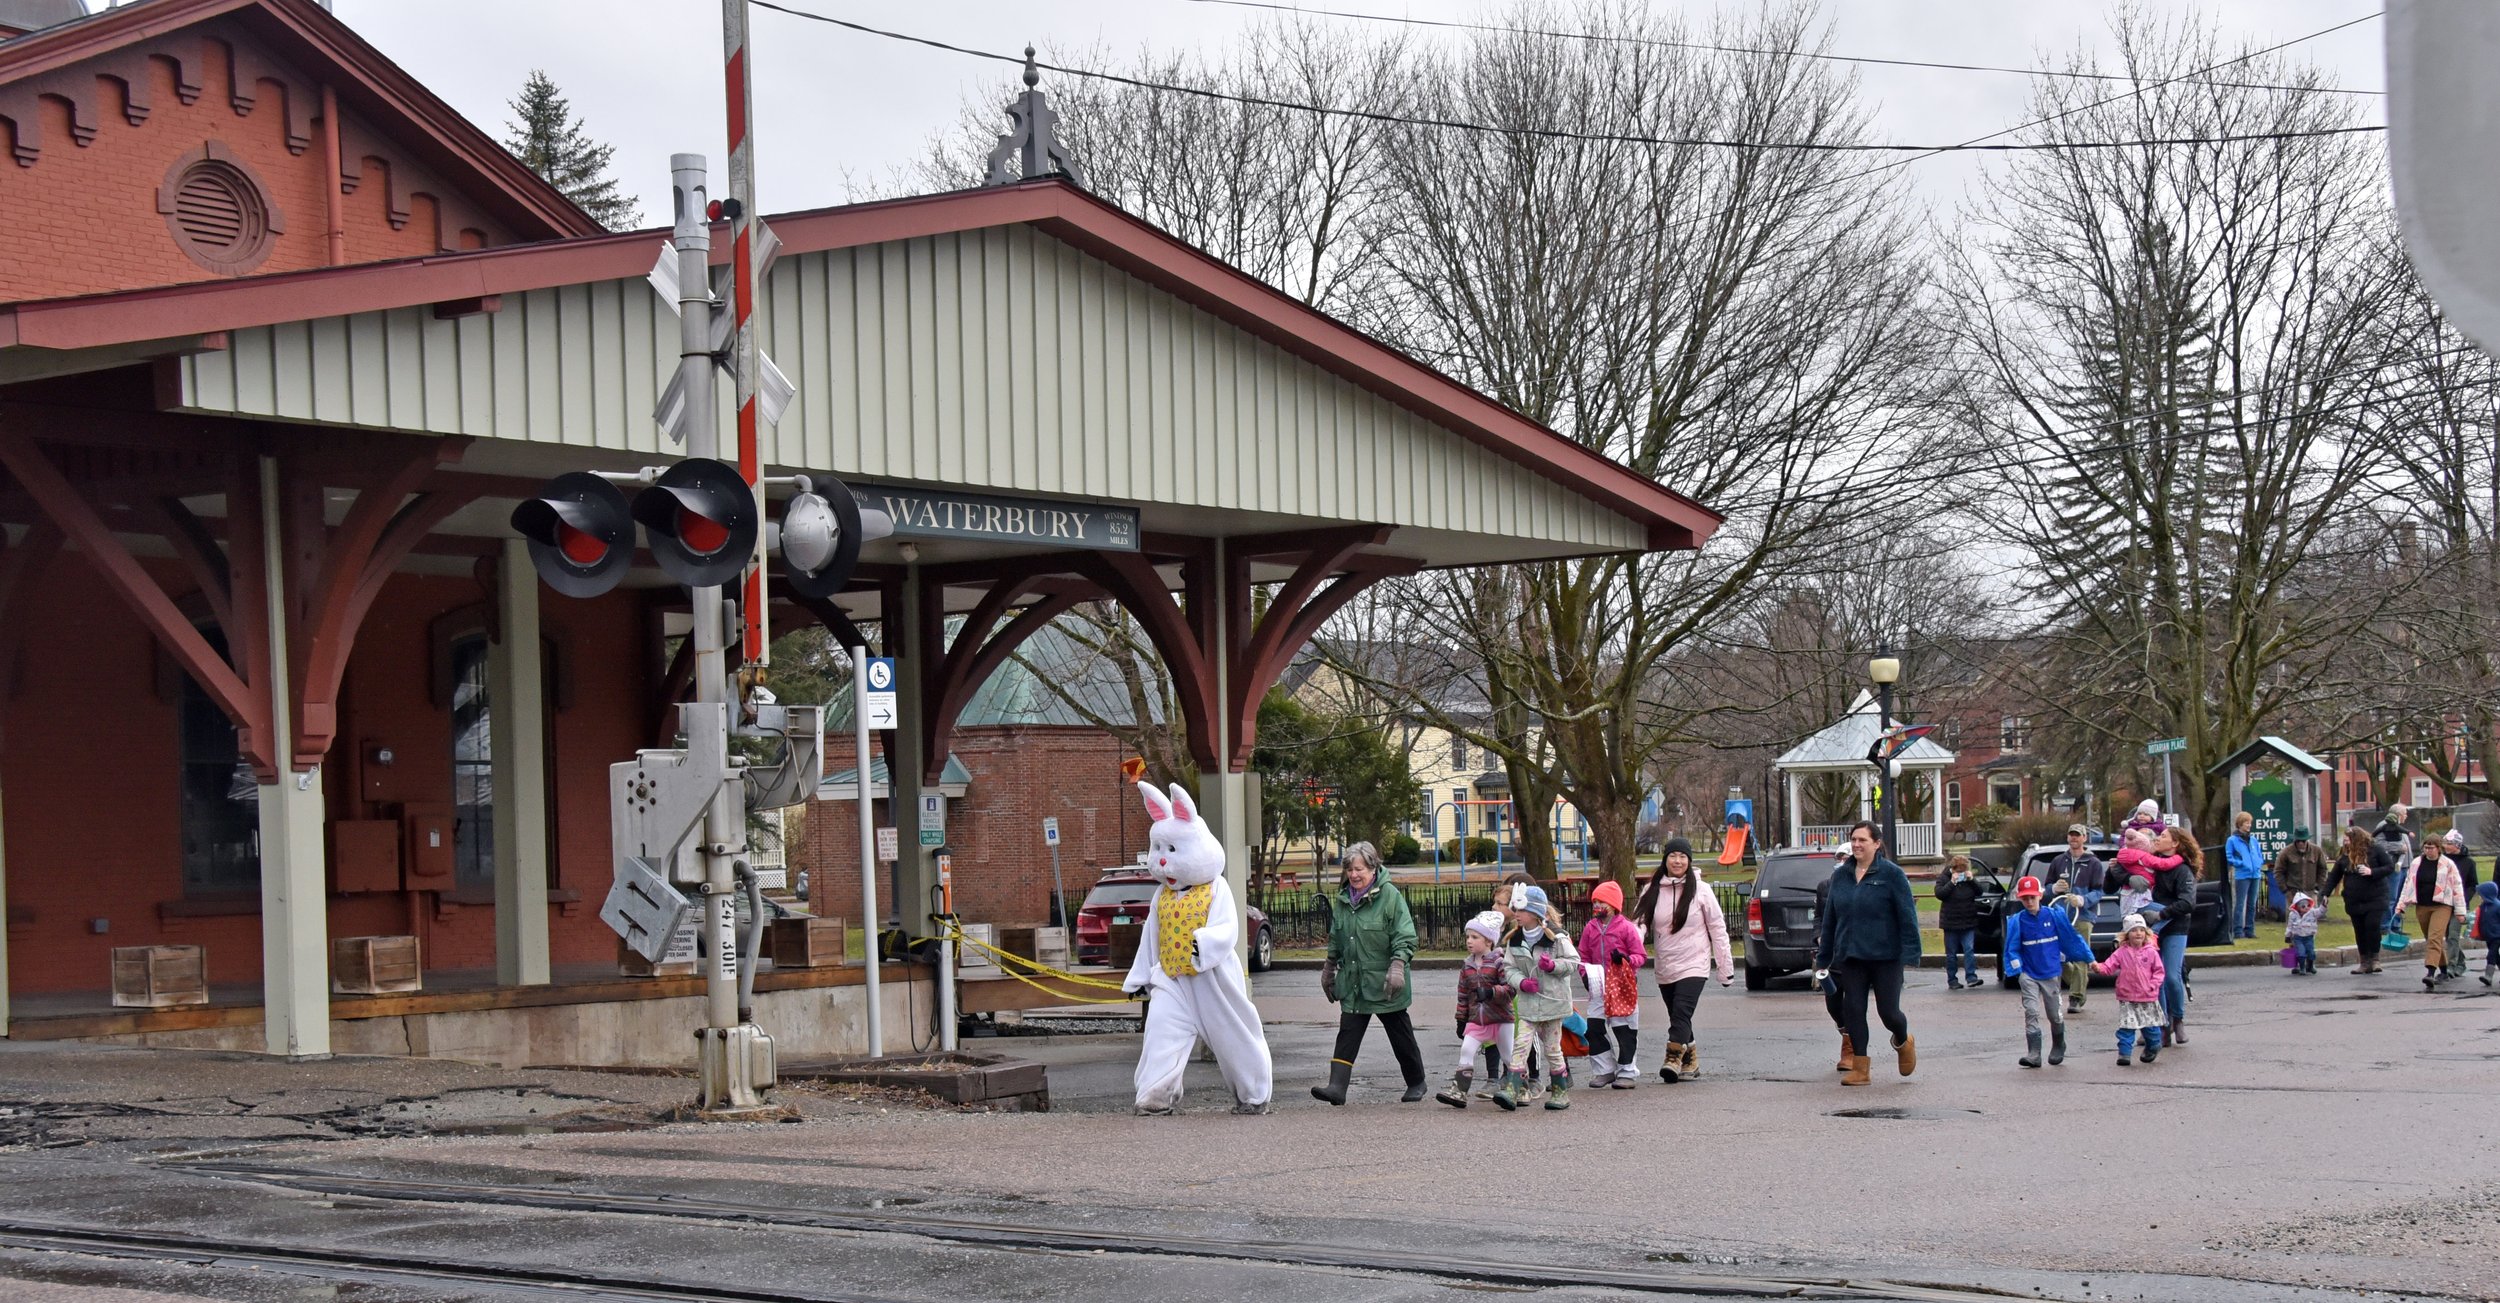  The parade passes the Waterbury Train Station as it heads to Pilgrim Park.  Photo by Gordon Miller 